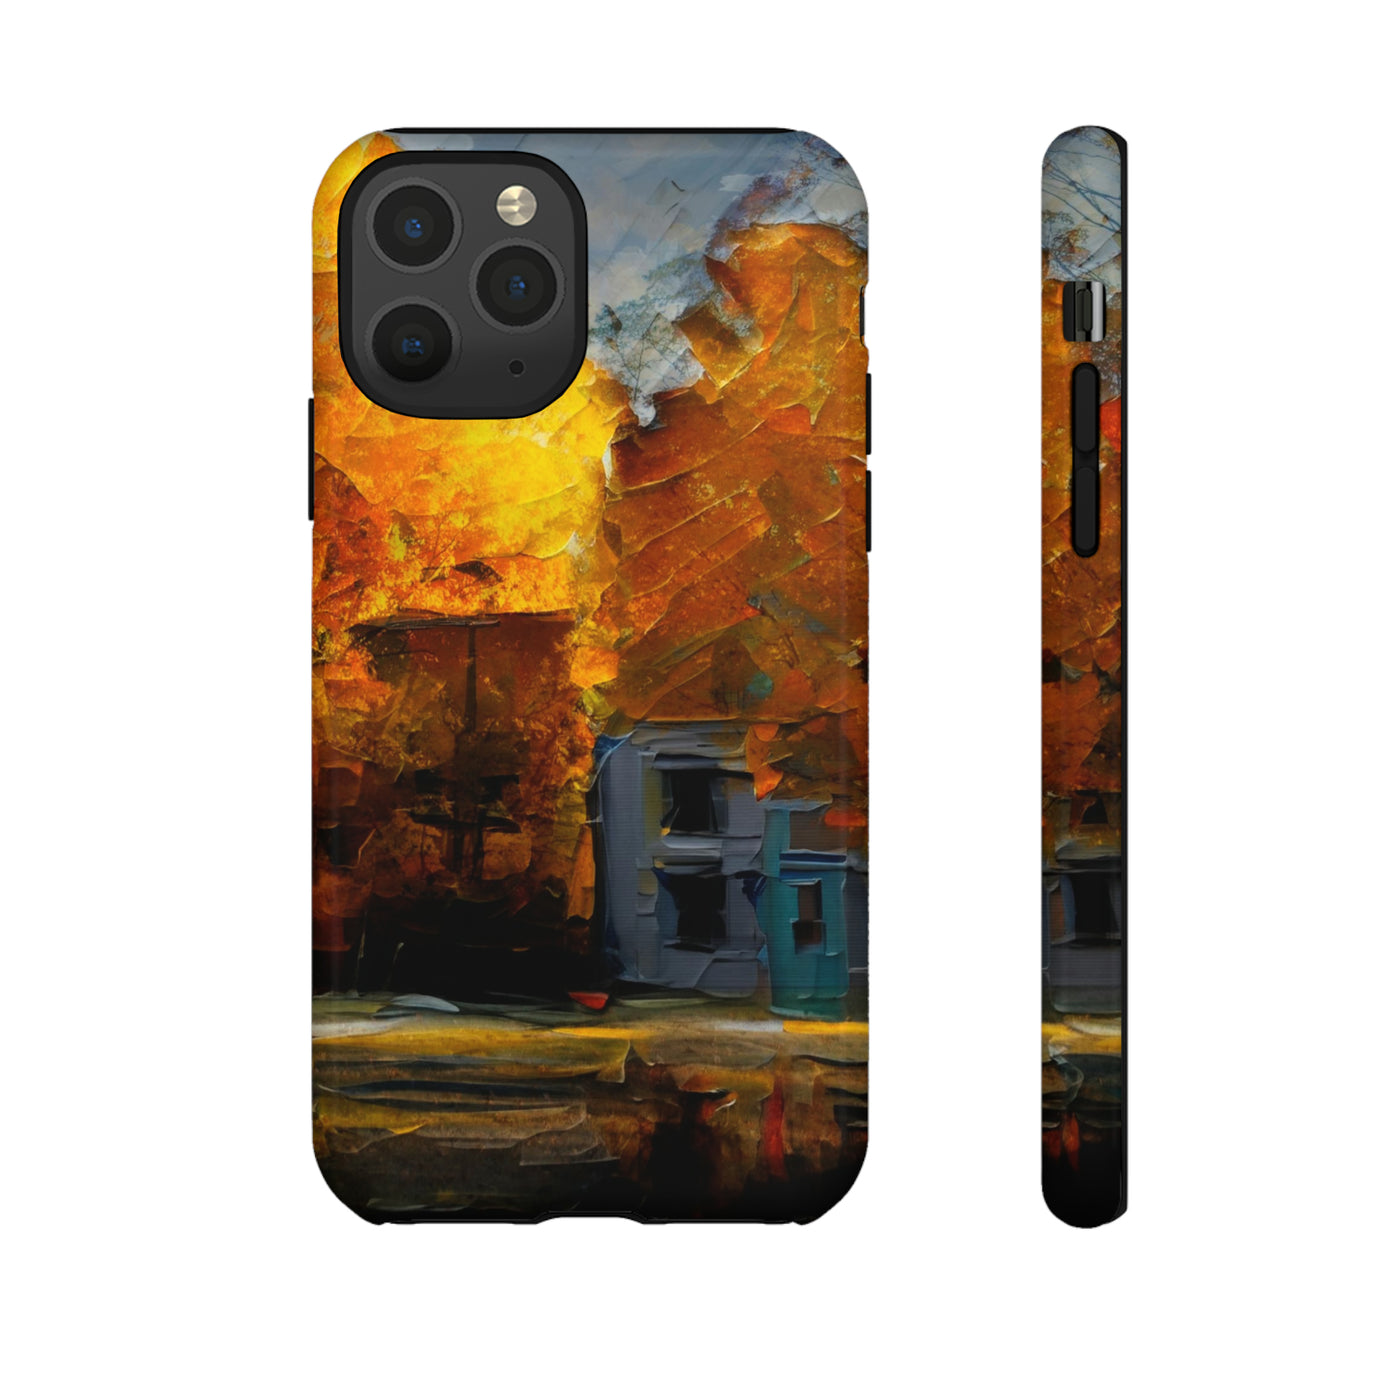 Cute IPhone Case | New England Fall, iPhone 15 Case | iPhone 15 Pro Case, Iphone 14 Case, Iphone 14 Pro Max Case, Iphone 13 Case